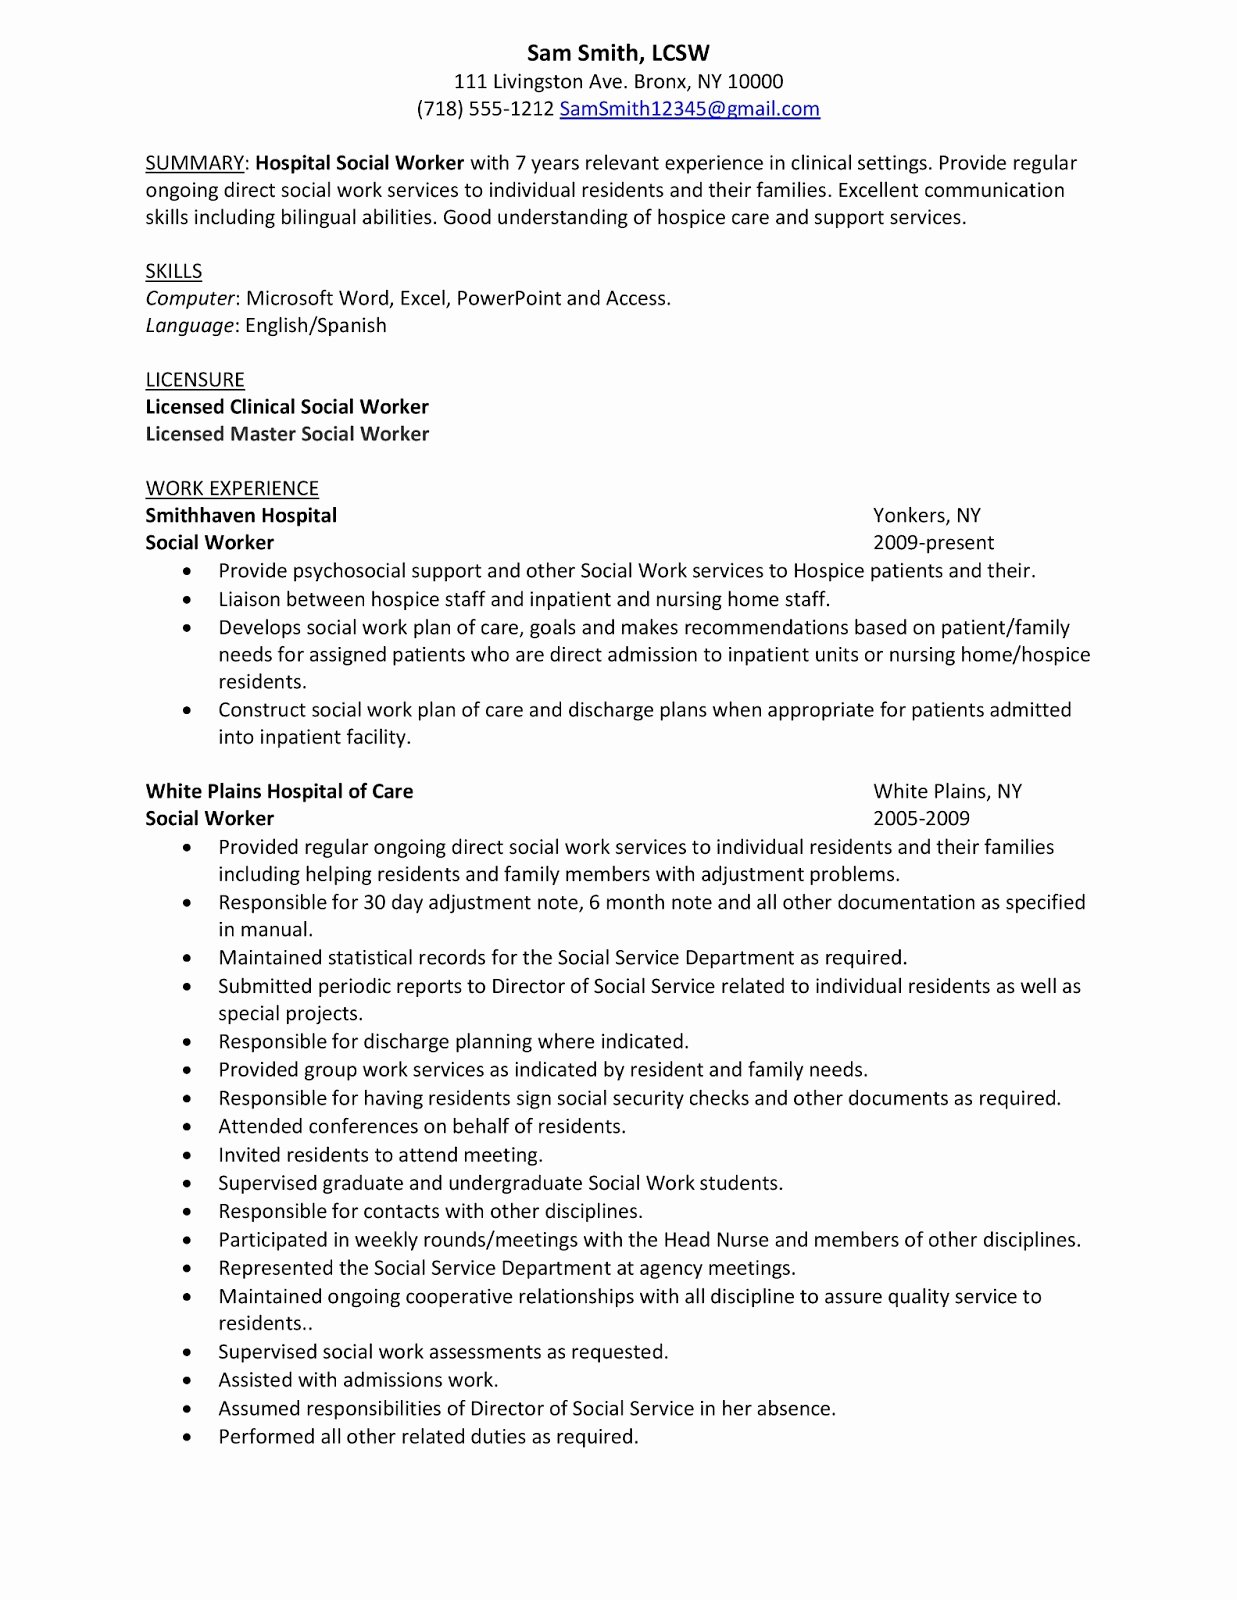 Summary Sample Hospital social Work Resume Examples with